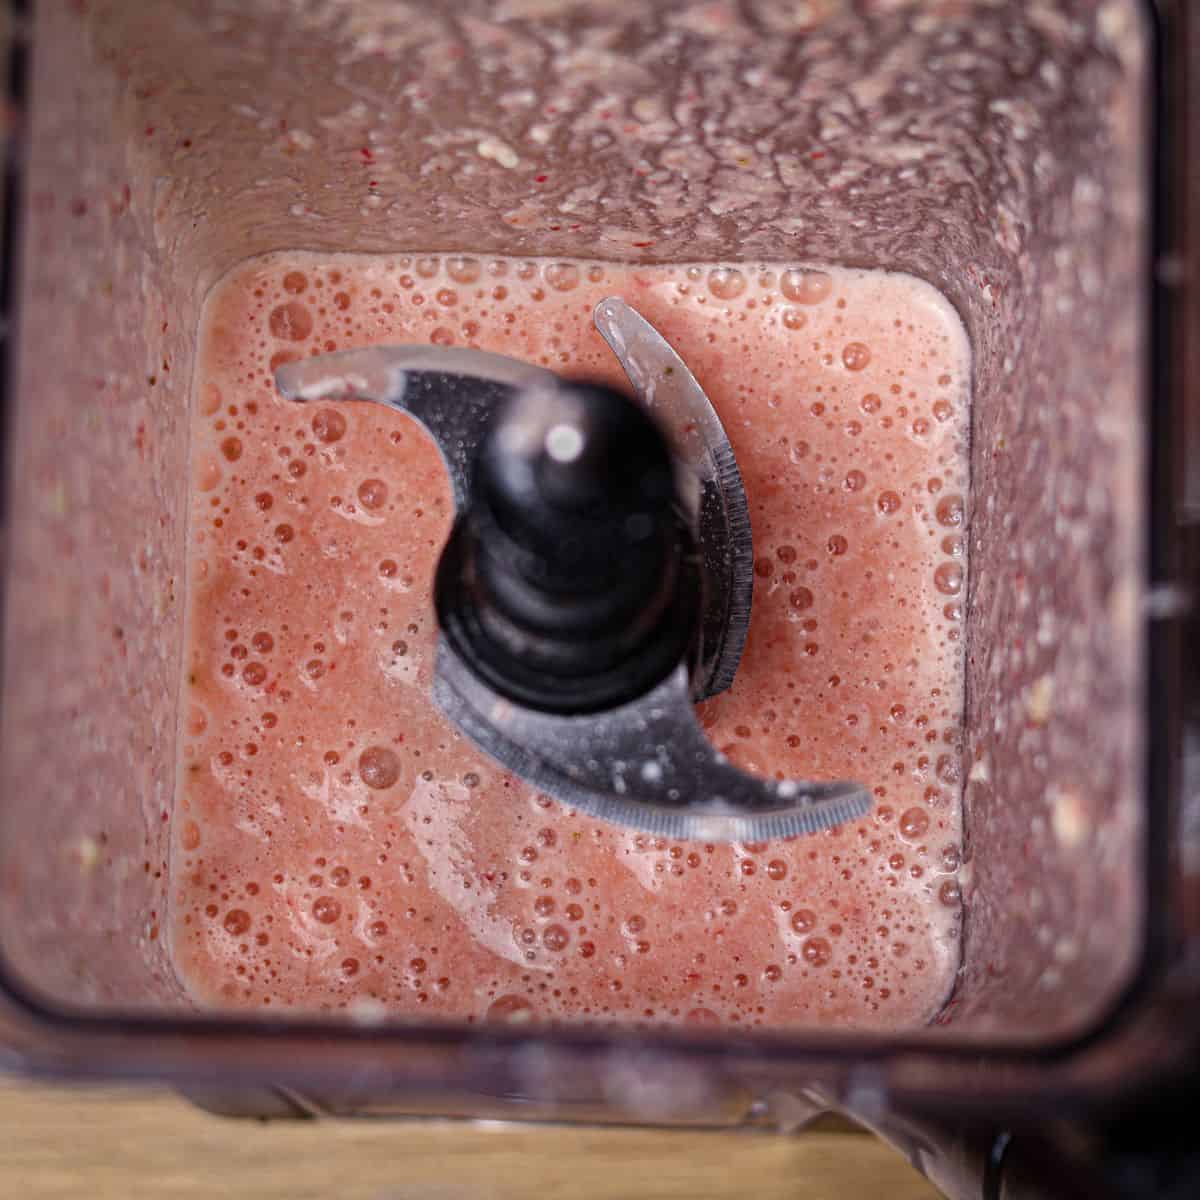 Looking directly down into a blender, showcasing a smooth pink strawberry pineapple smoothie after adding flavors.